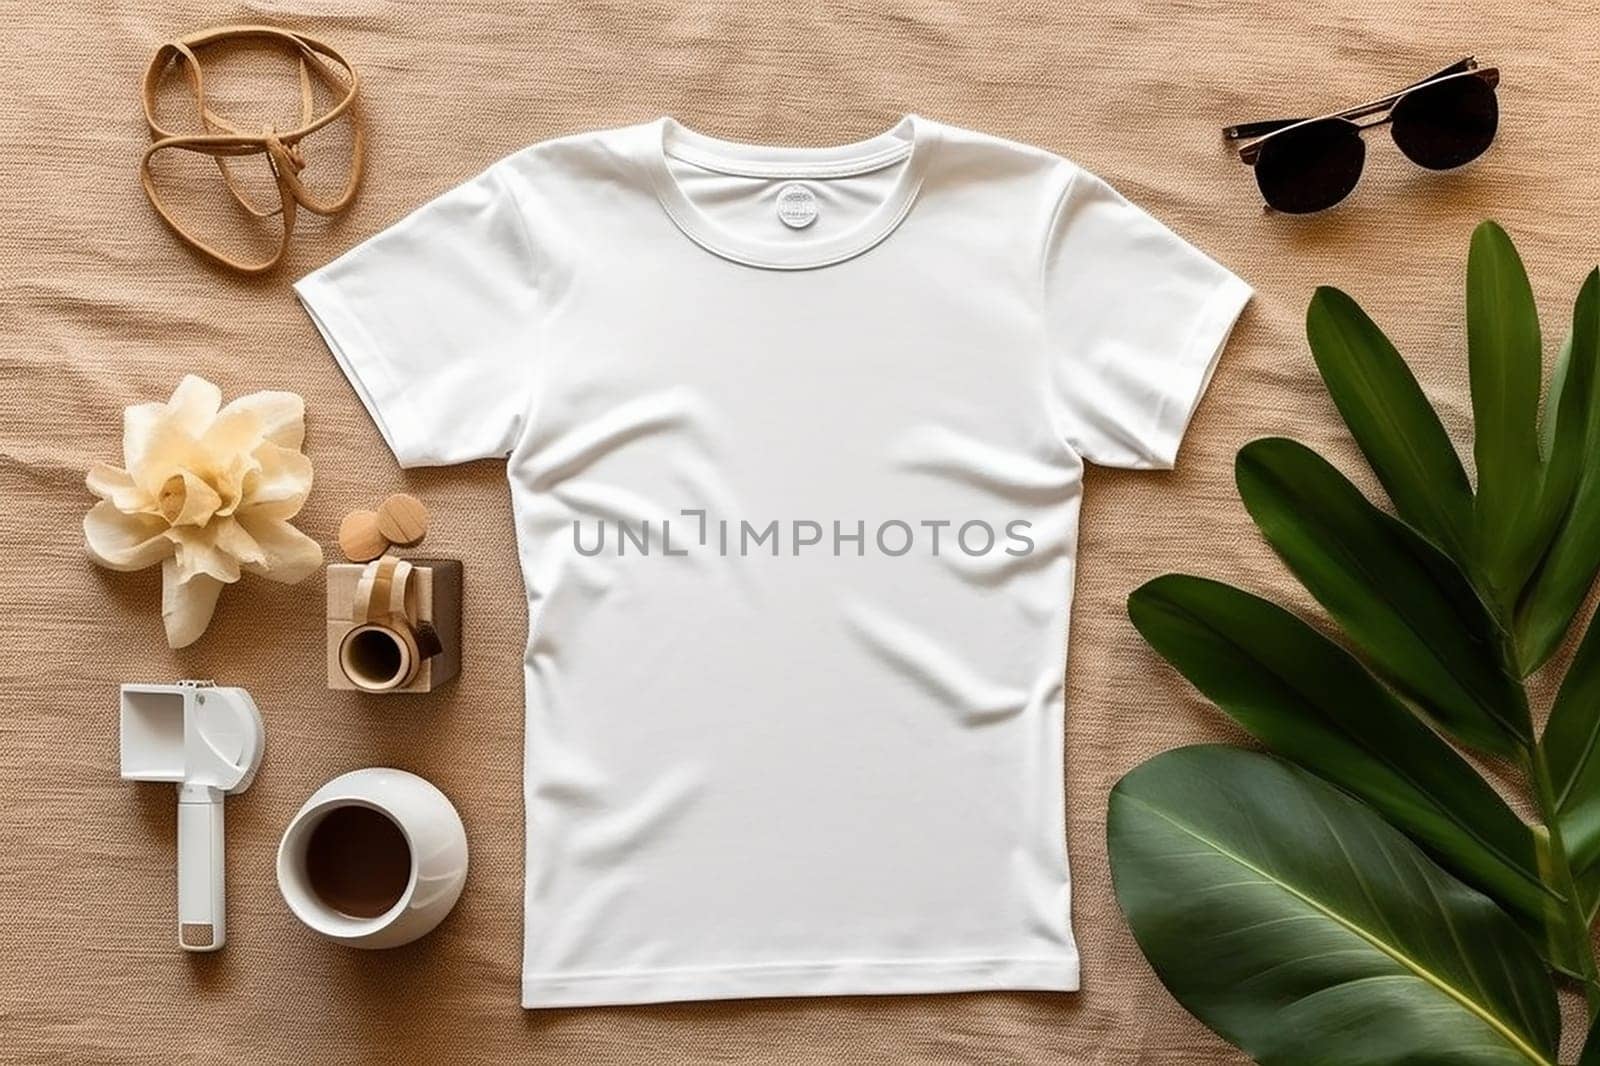 A mock up of a plain white t-shirt laid out with accessories and plants. by Hype2art